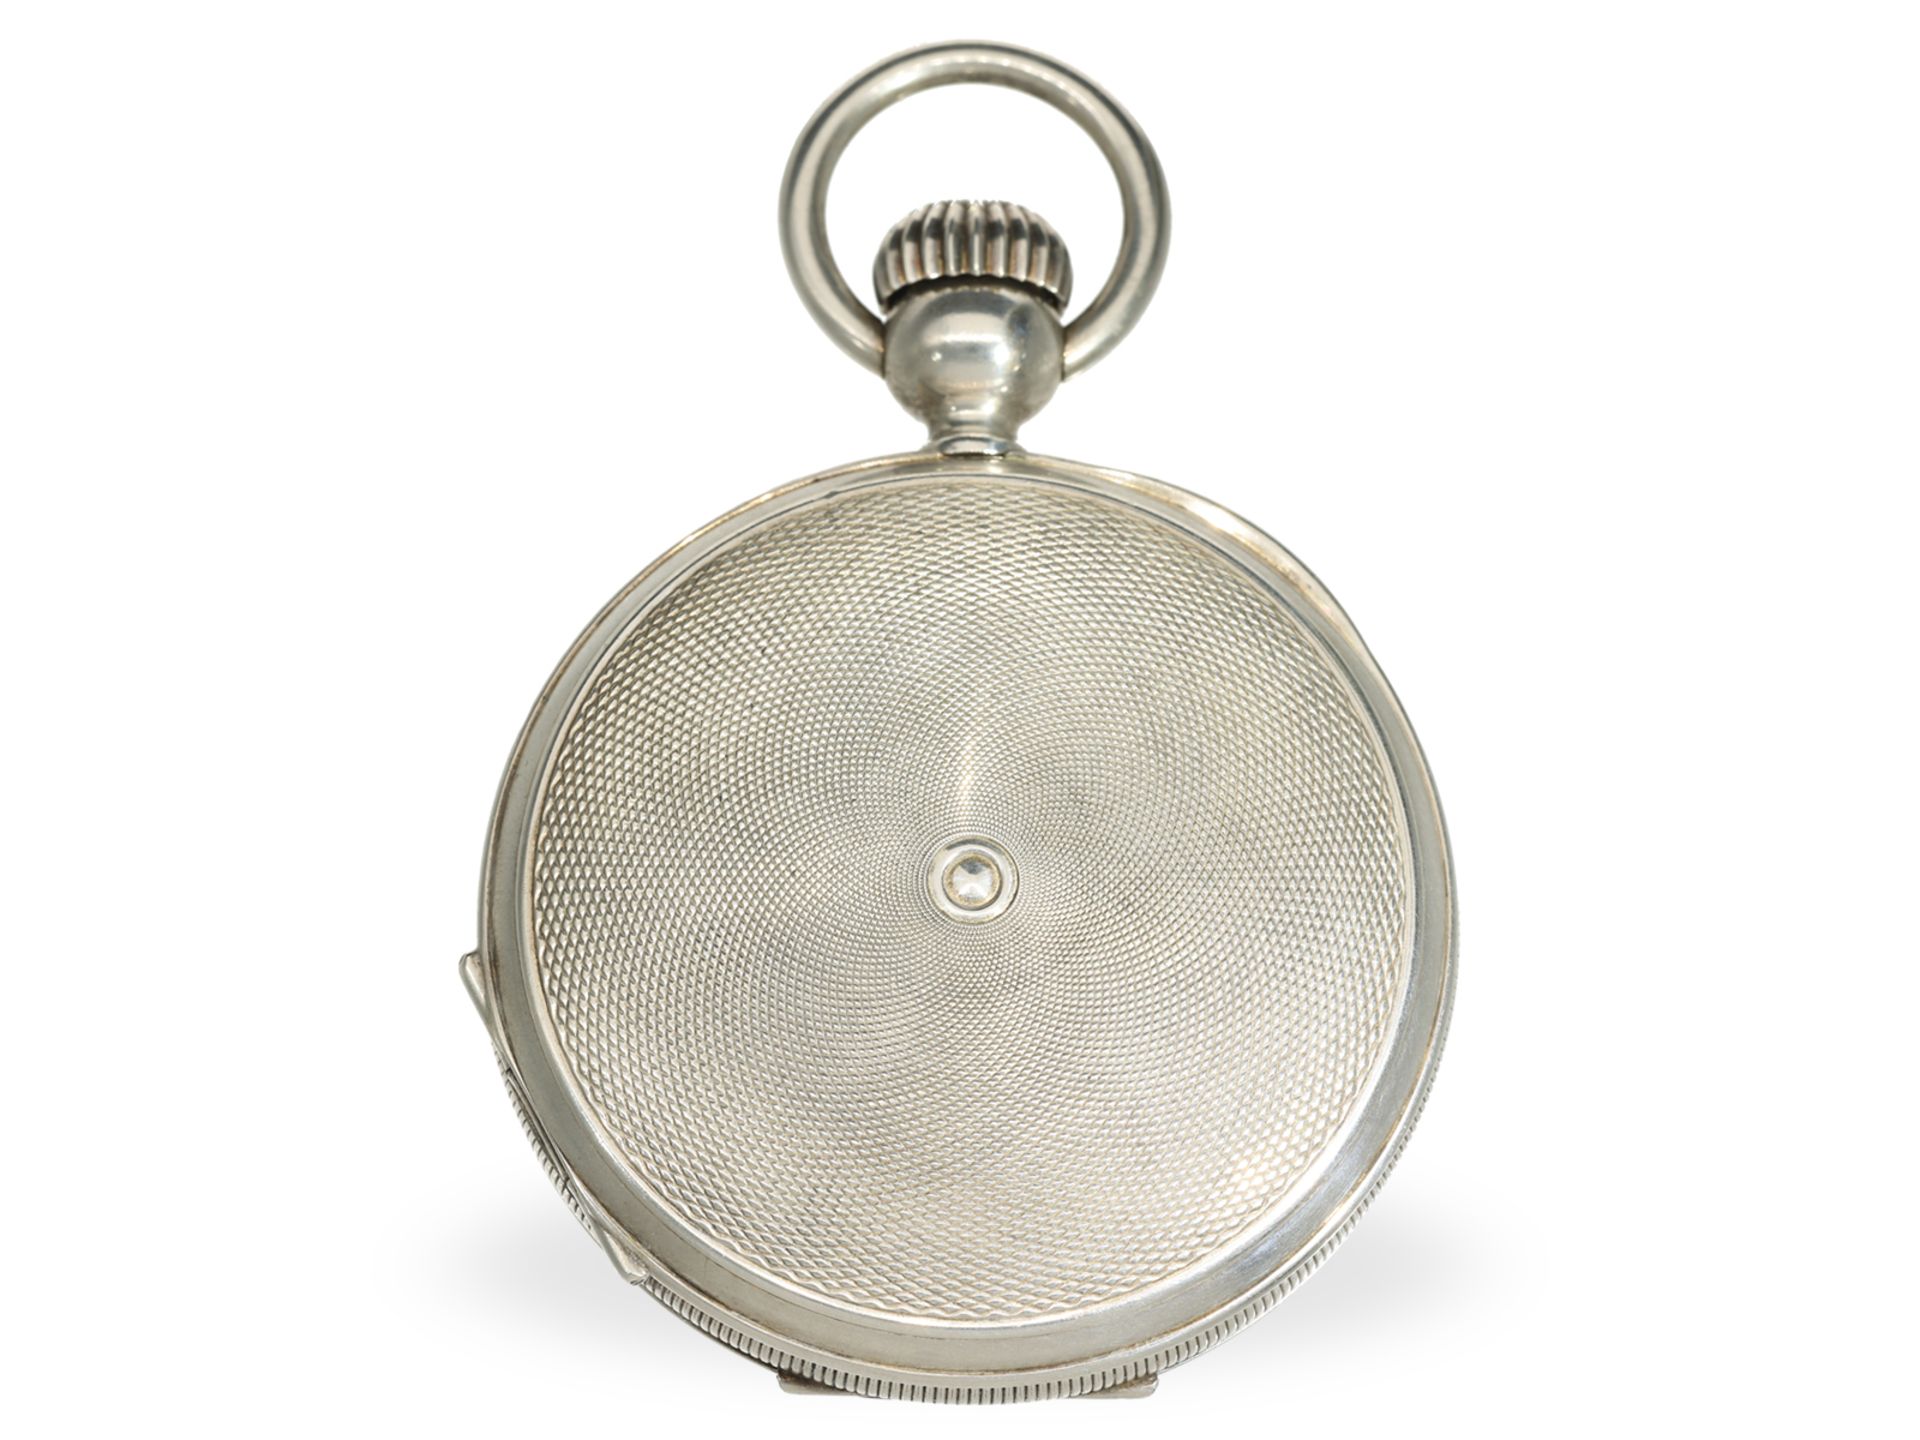 Pocket watch: rare, limited Longines Ernest Francillon 125th "1867" Ref. 840.8022, 399/1000 - Image 4 of 7